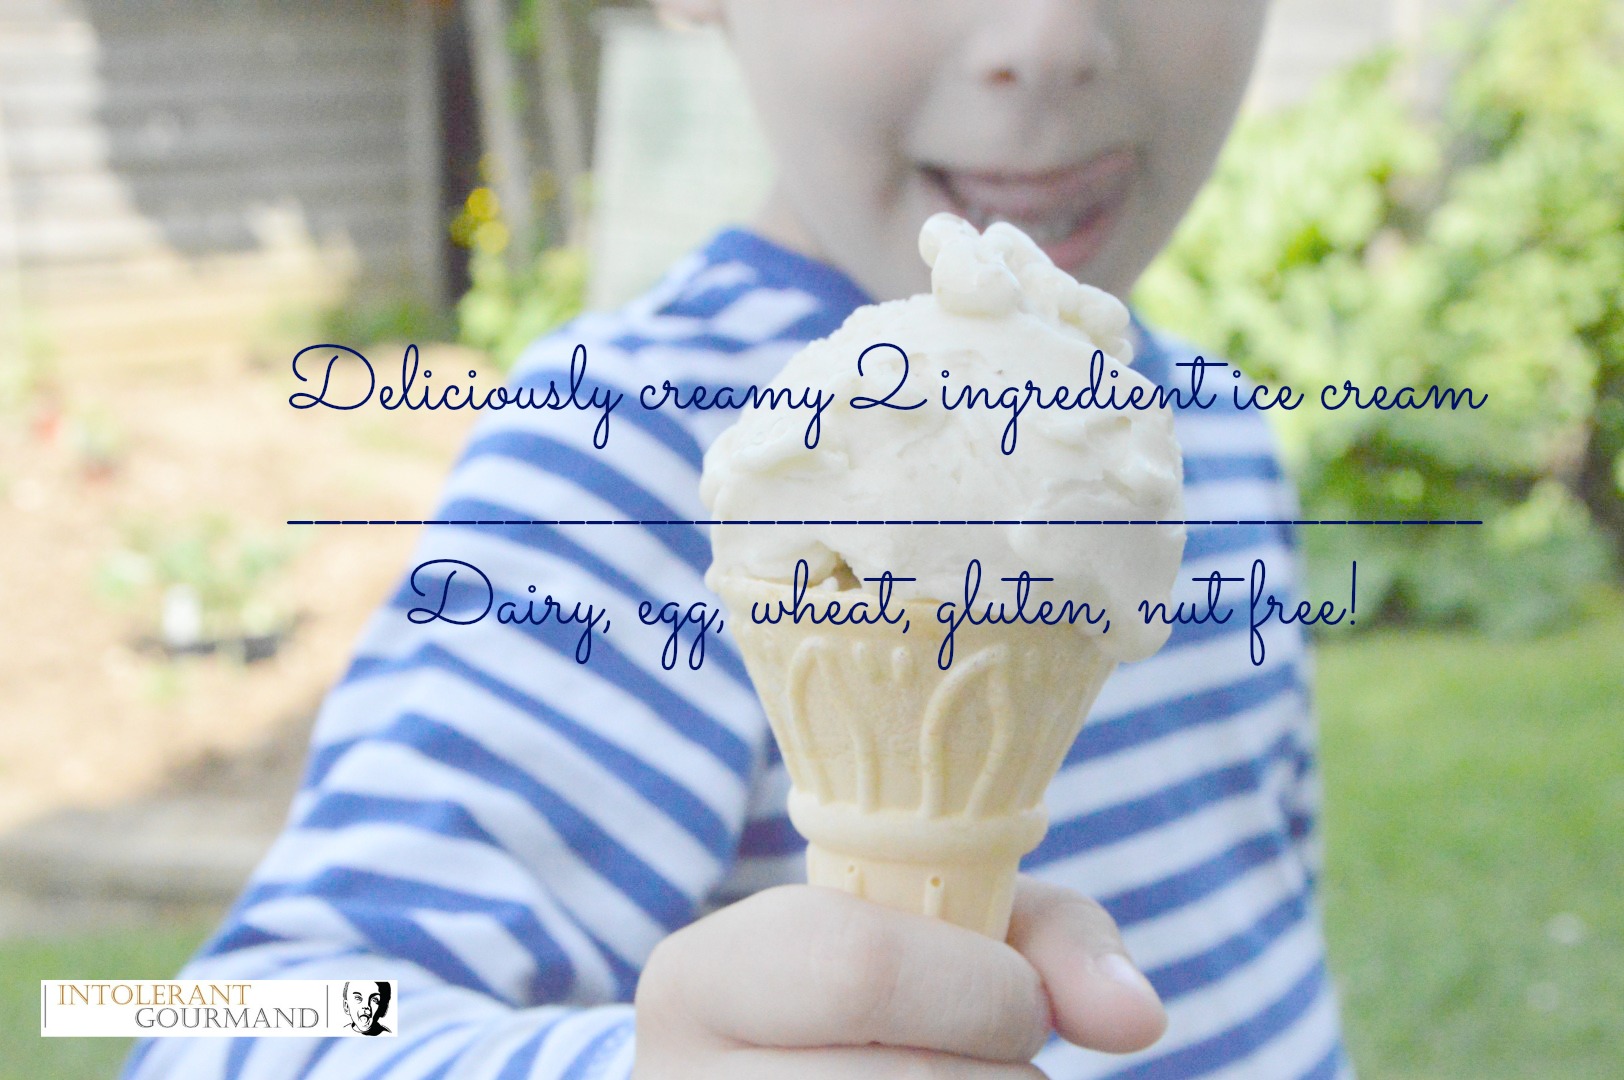 Deliciously creamy and healthy 2 ingredient free-from ice cream! 